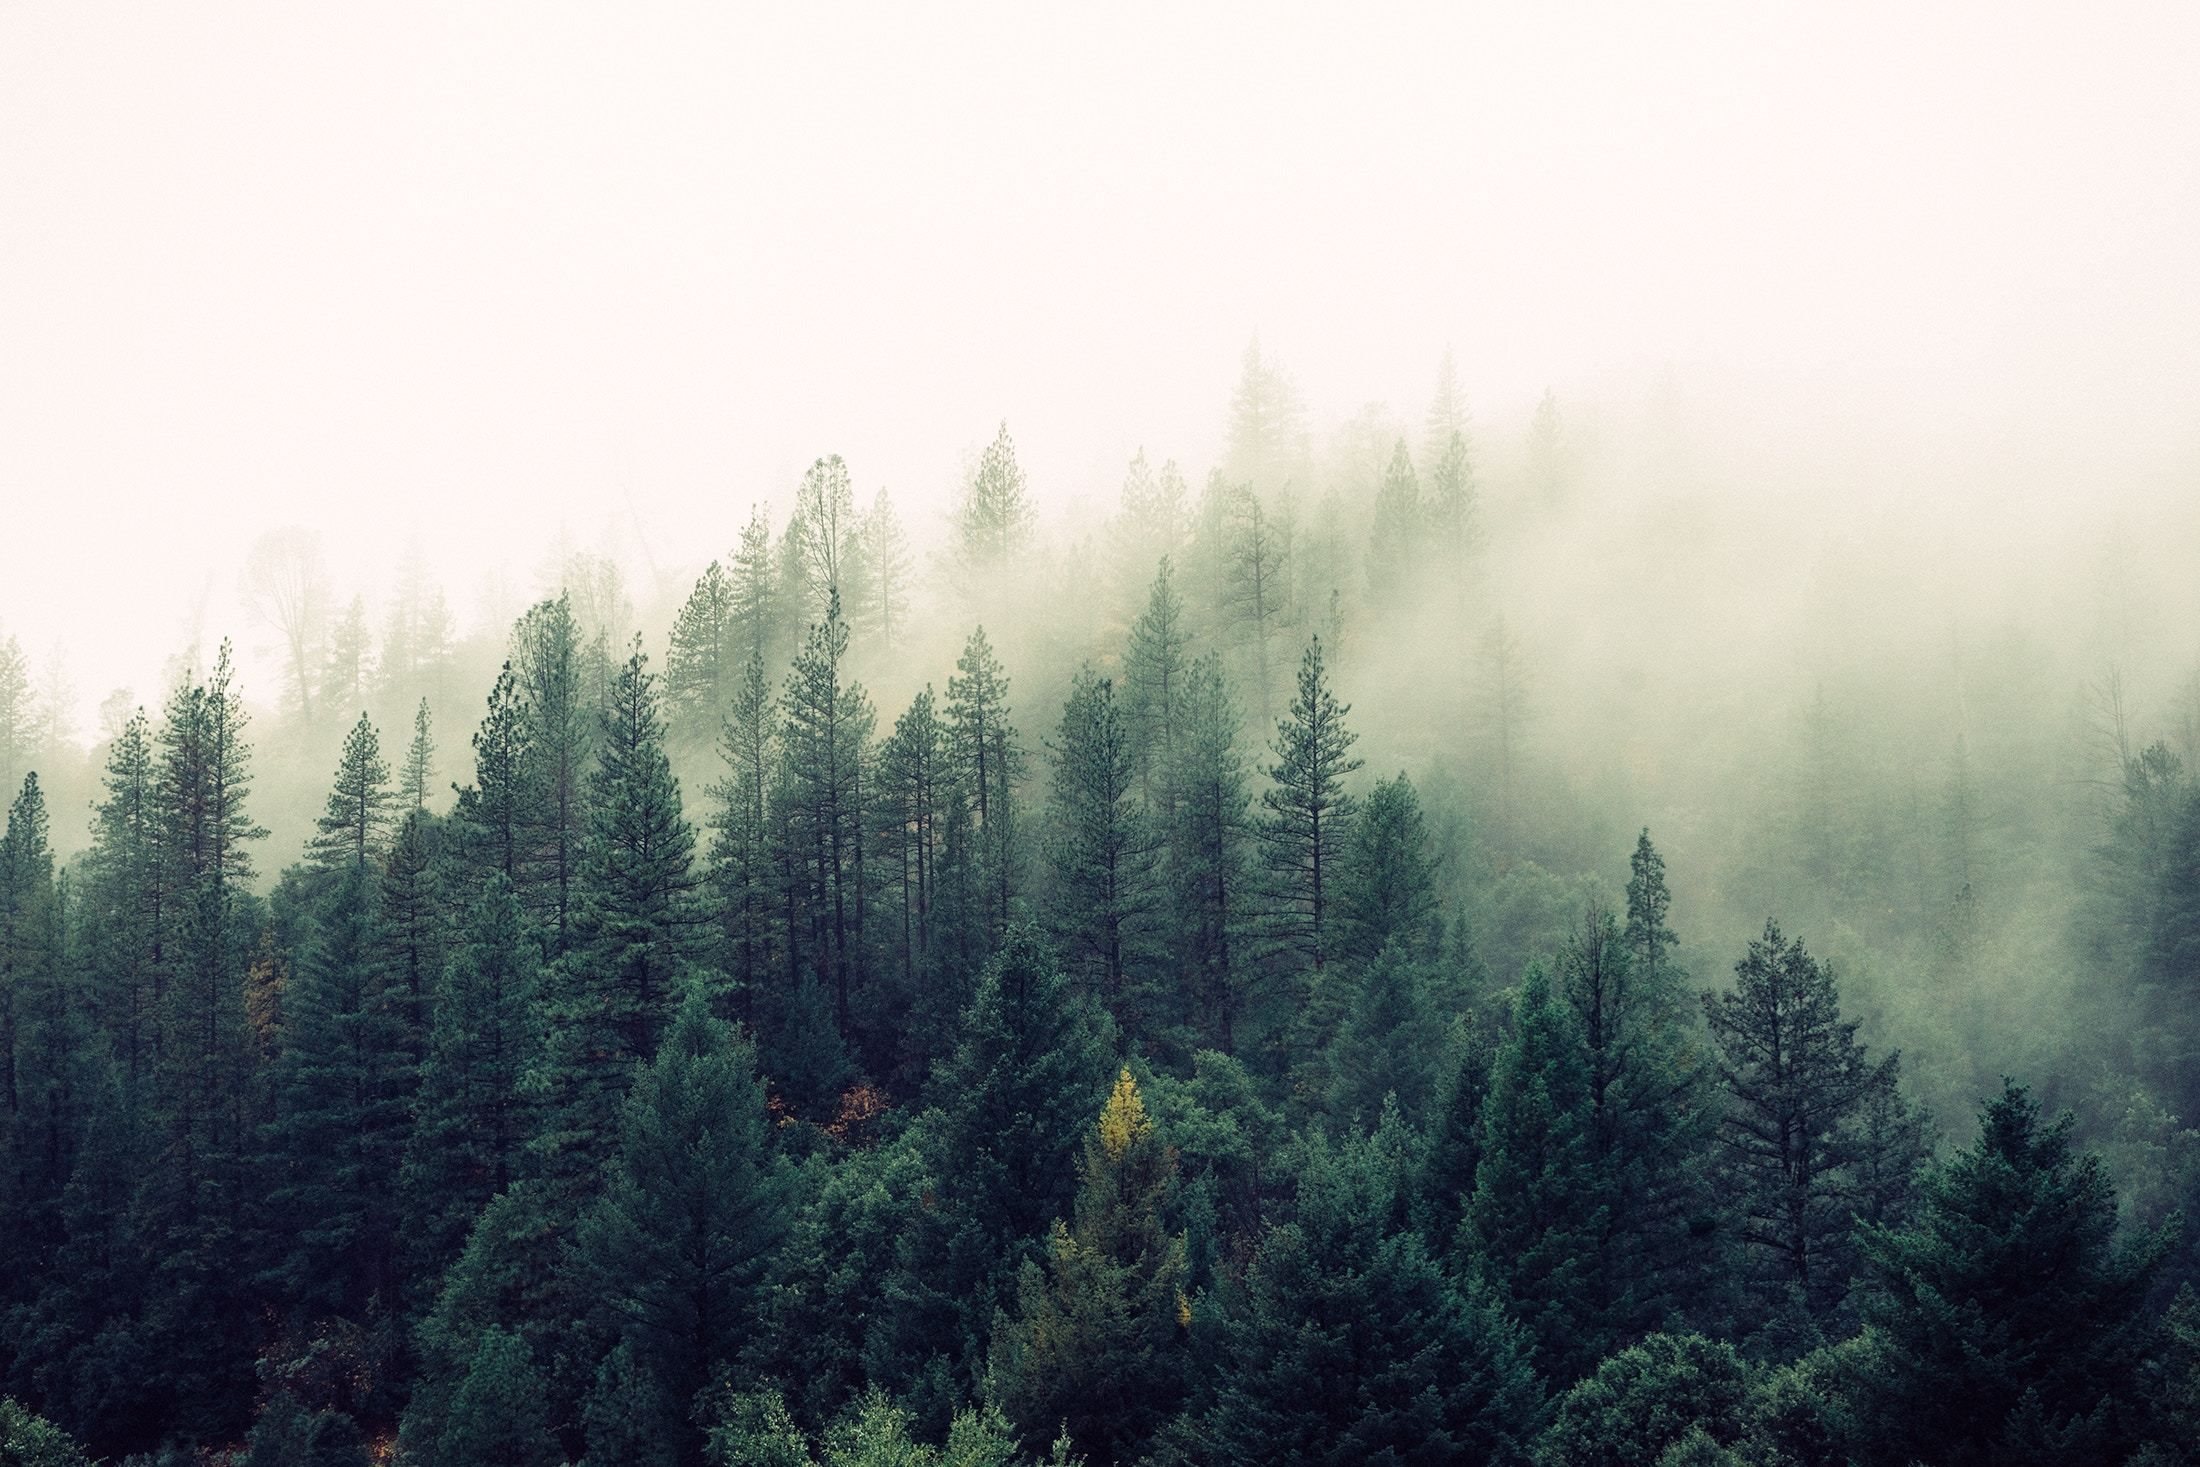 A foggy forest with trees in the background.